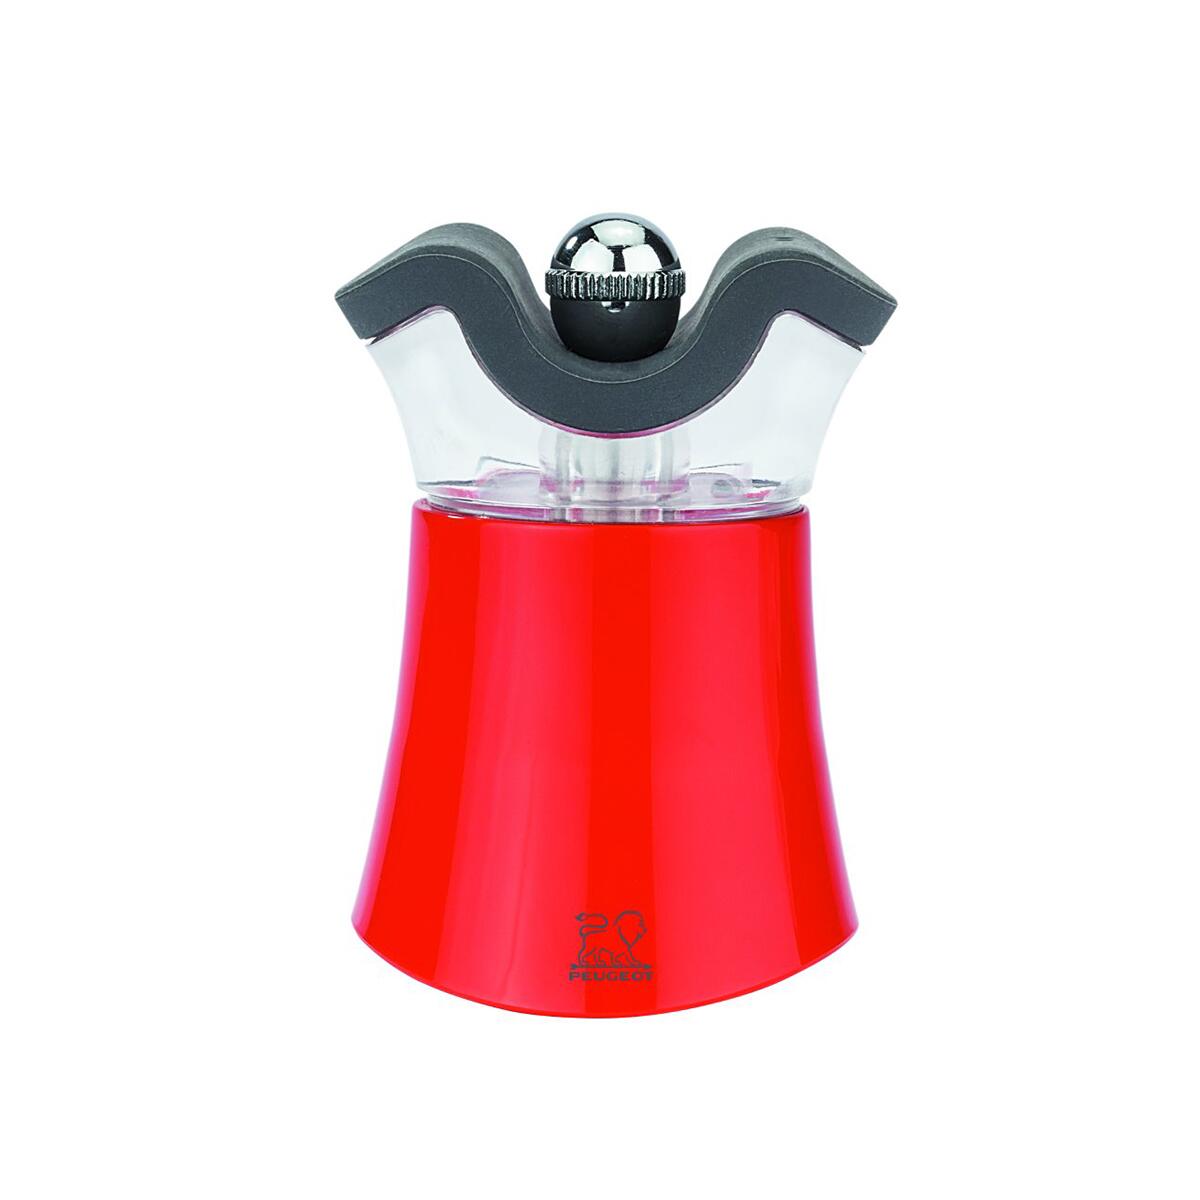 Peugeot Peps Combi 2 Function Black Pepper and Salt Mill Red